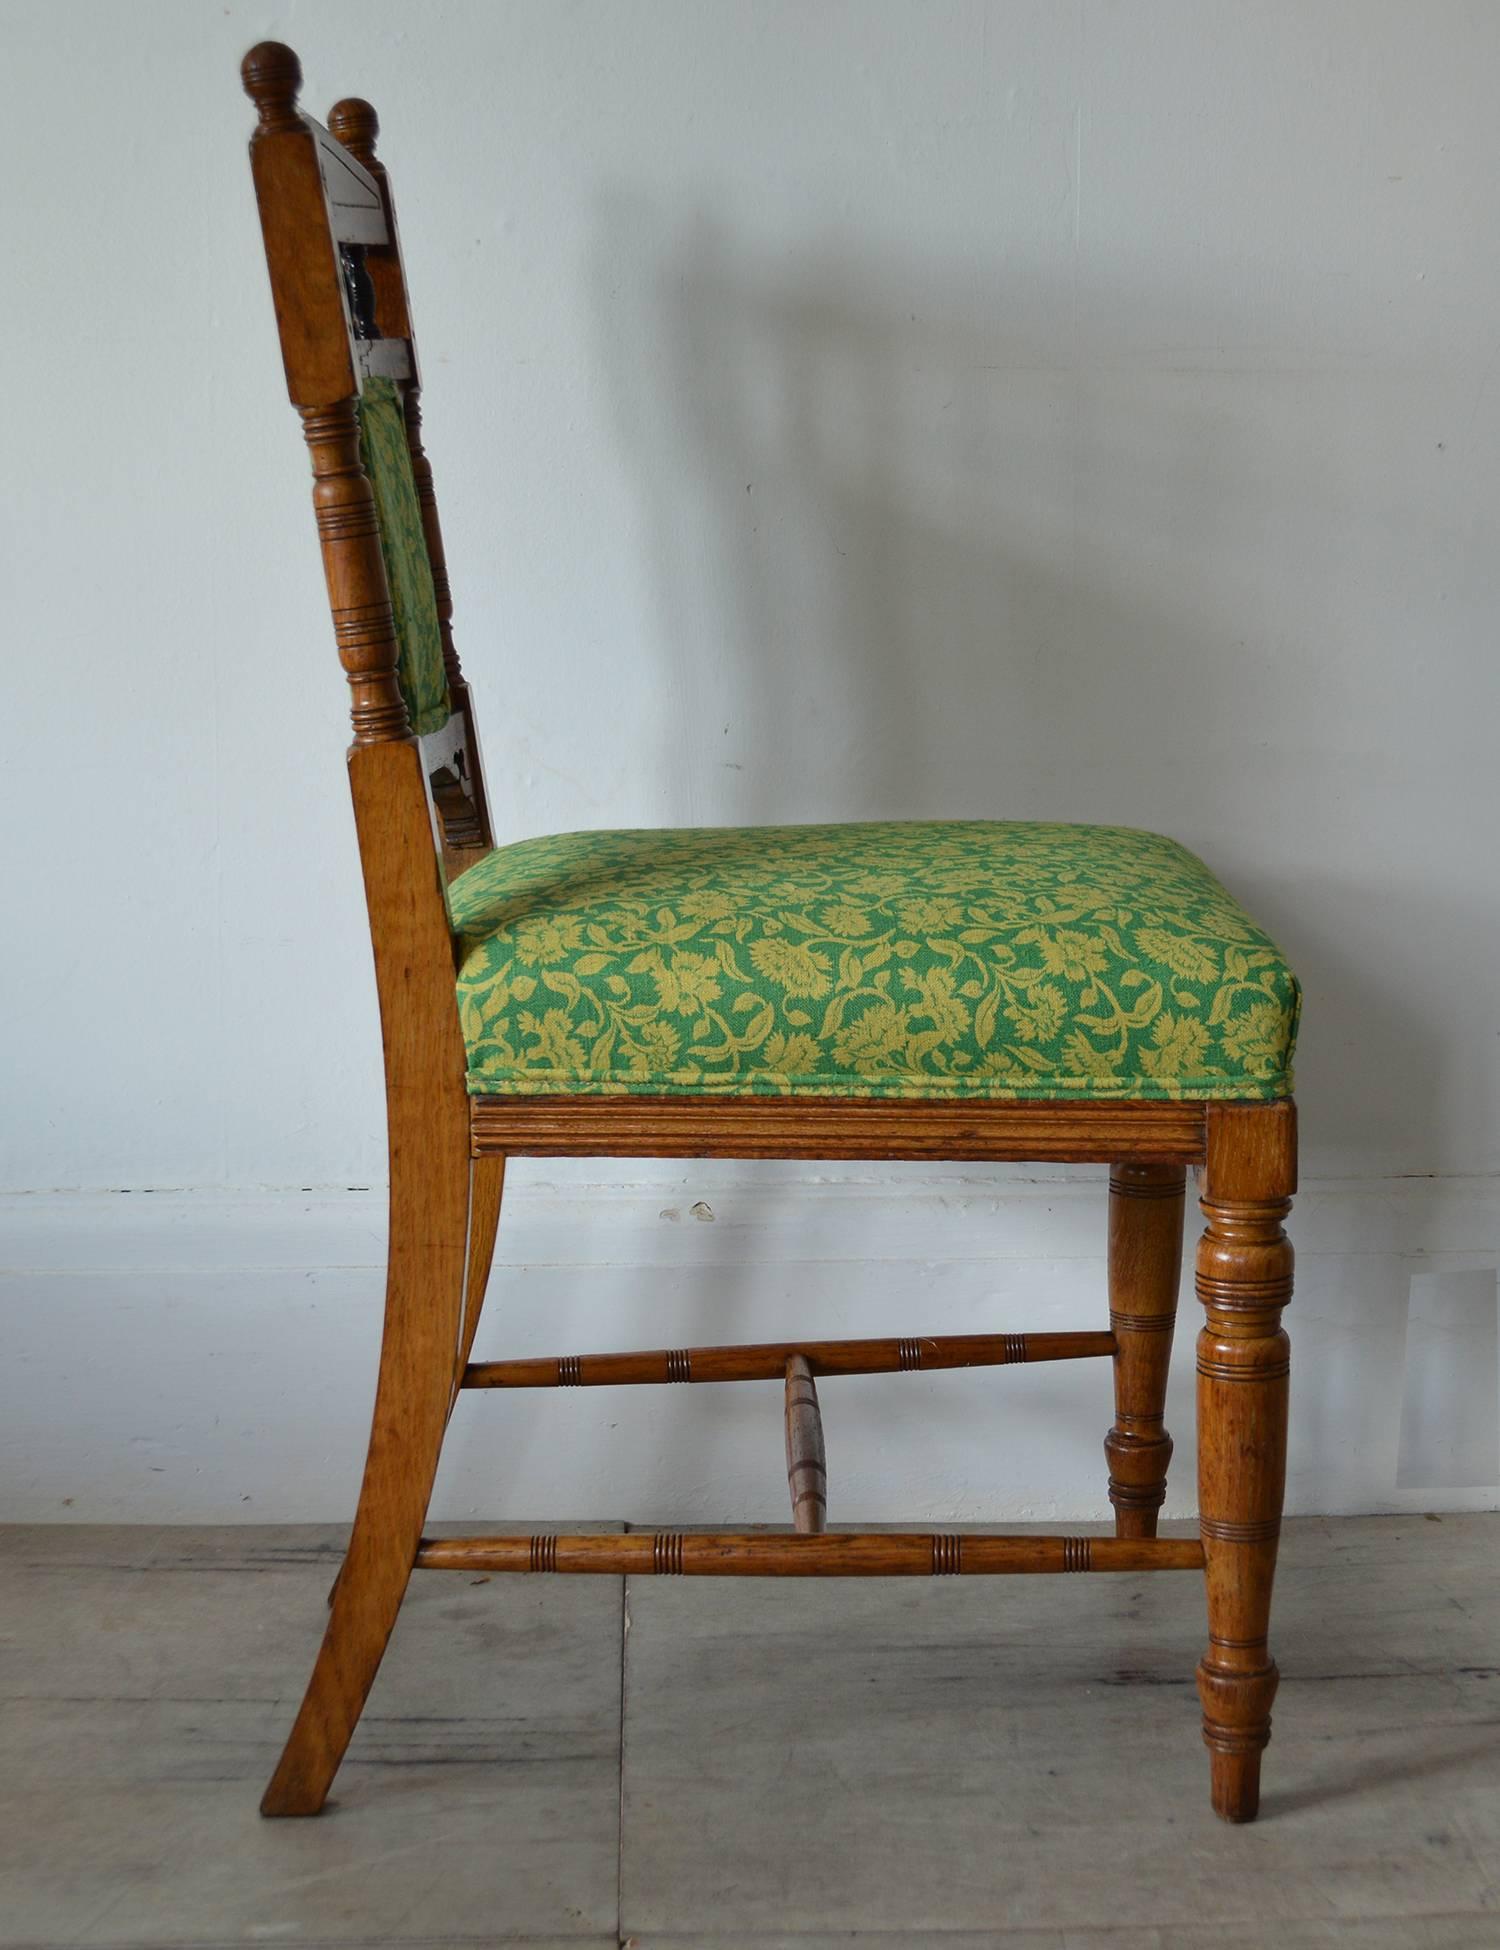 Great Britain (UK) Set of Four Antique Aesthetic Style Chairs, English, circa 1900